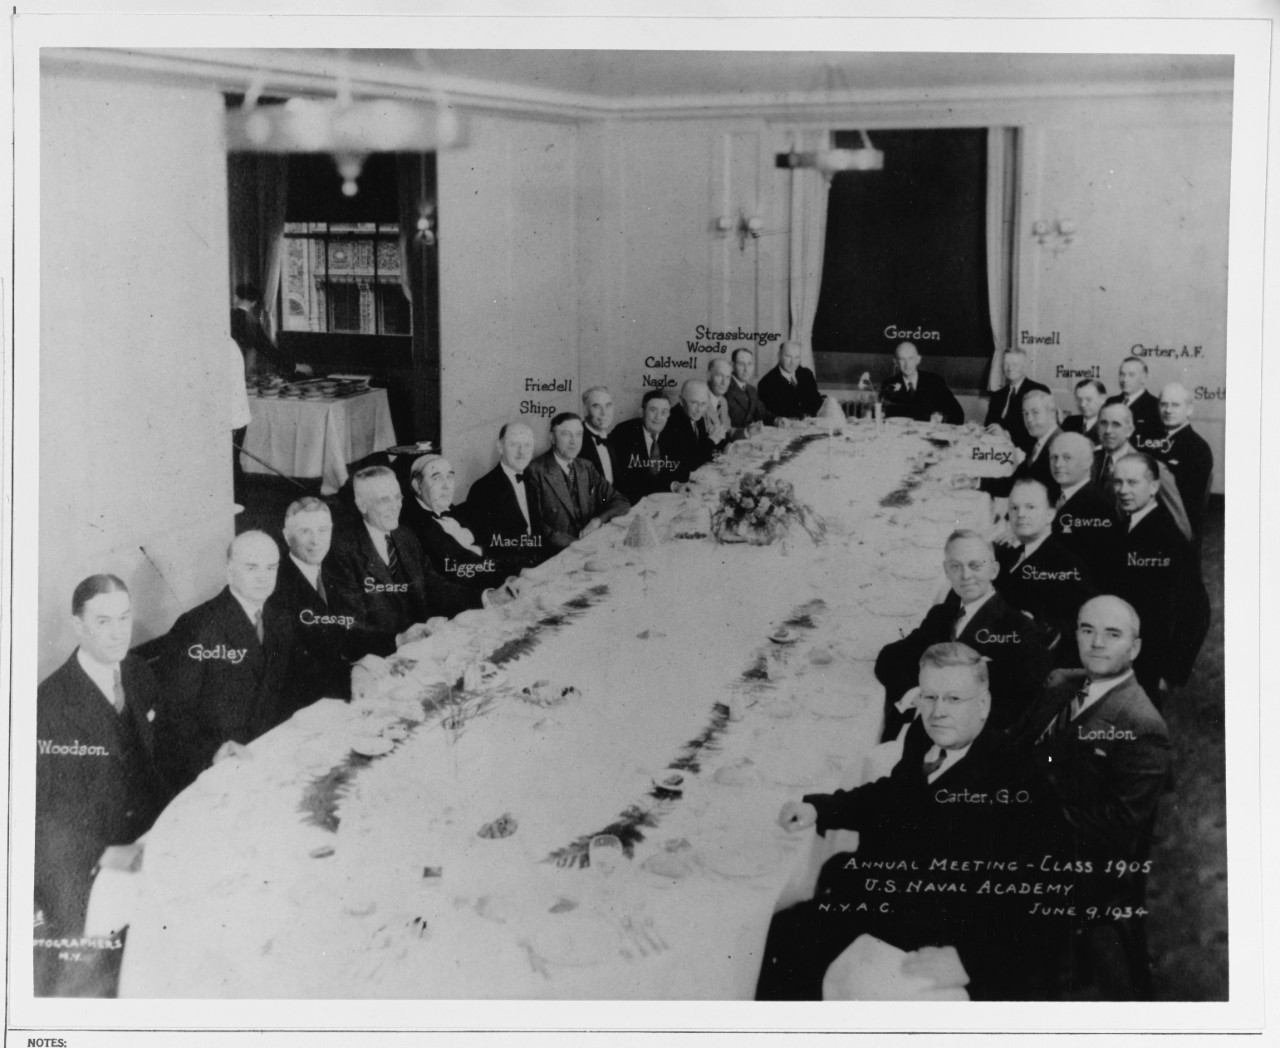 Annual Meeting, Class of 1905 US Naval Academy